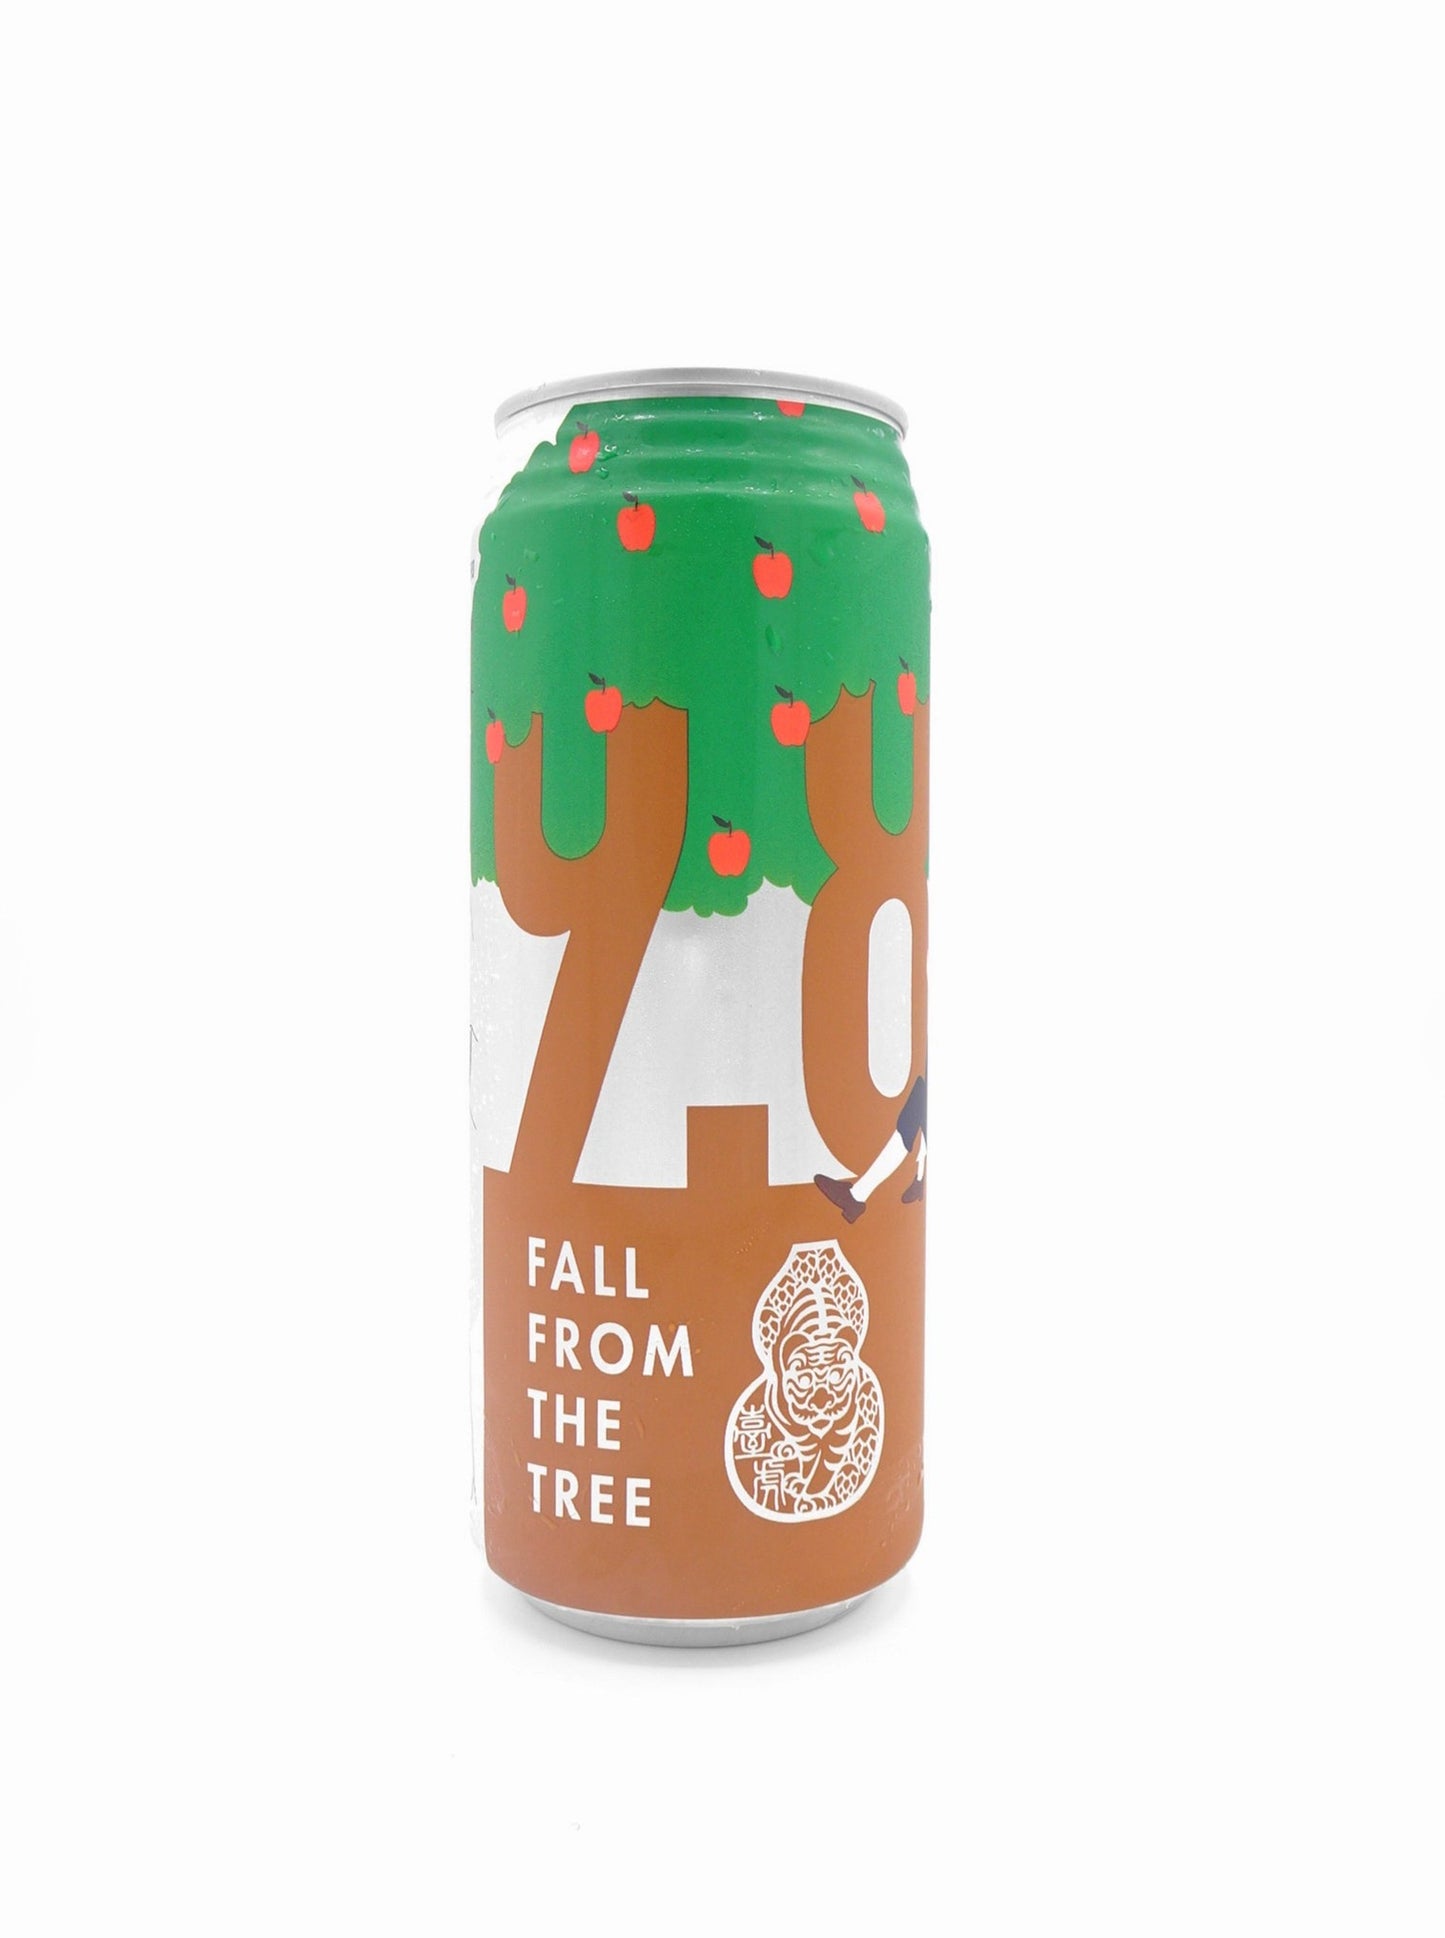 Fall From The Tree Fruited Ale／フォールフロムザツリー フルーツエール 蘋蘋乓乓